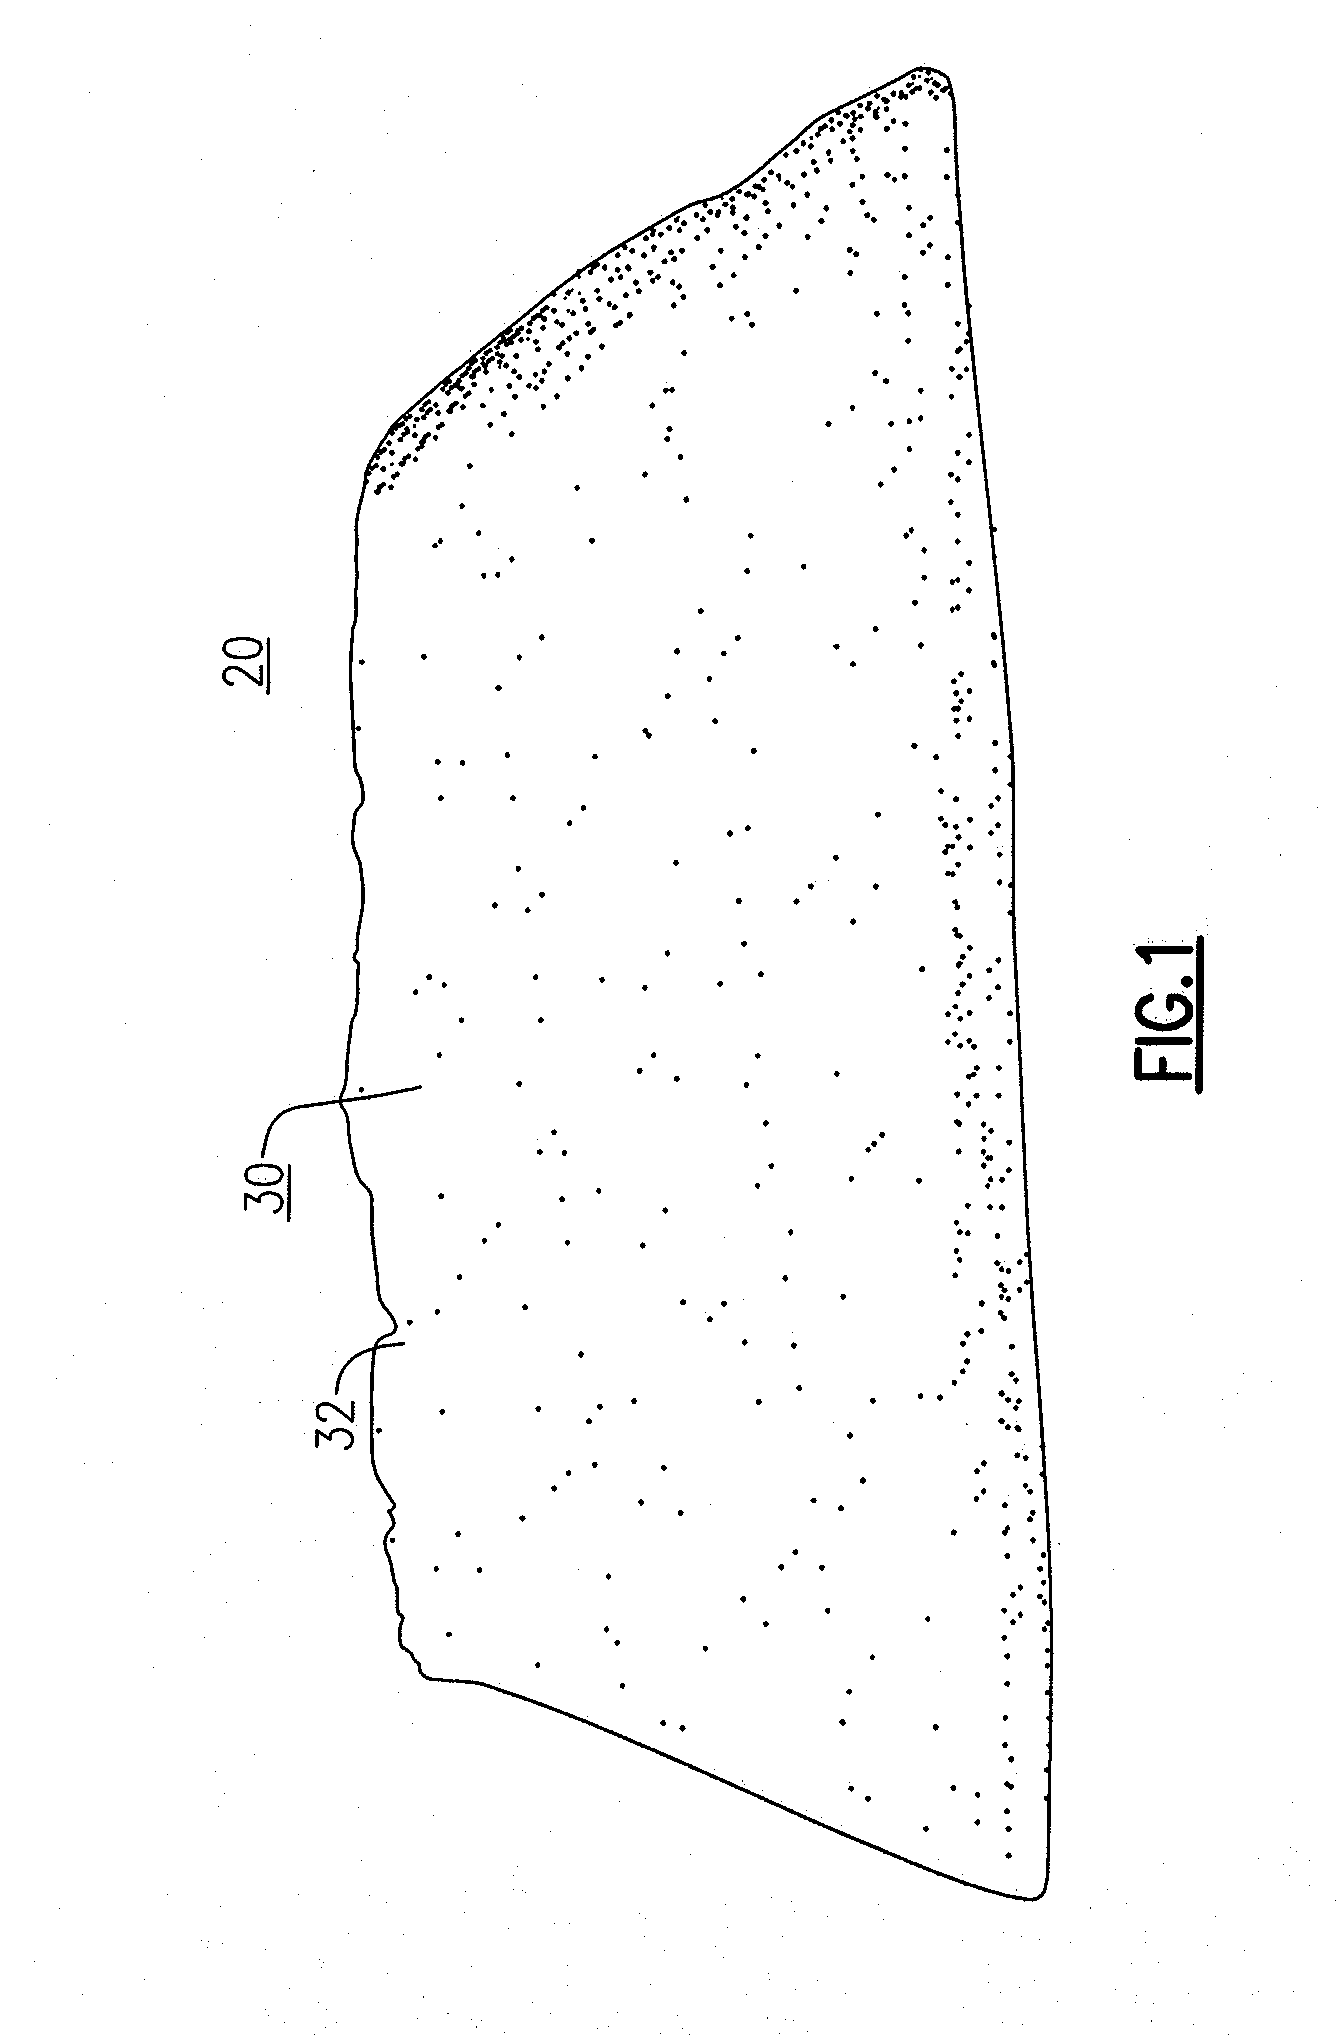 Latent fingerprint powder applicator and related method of use